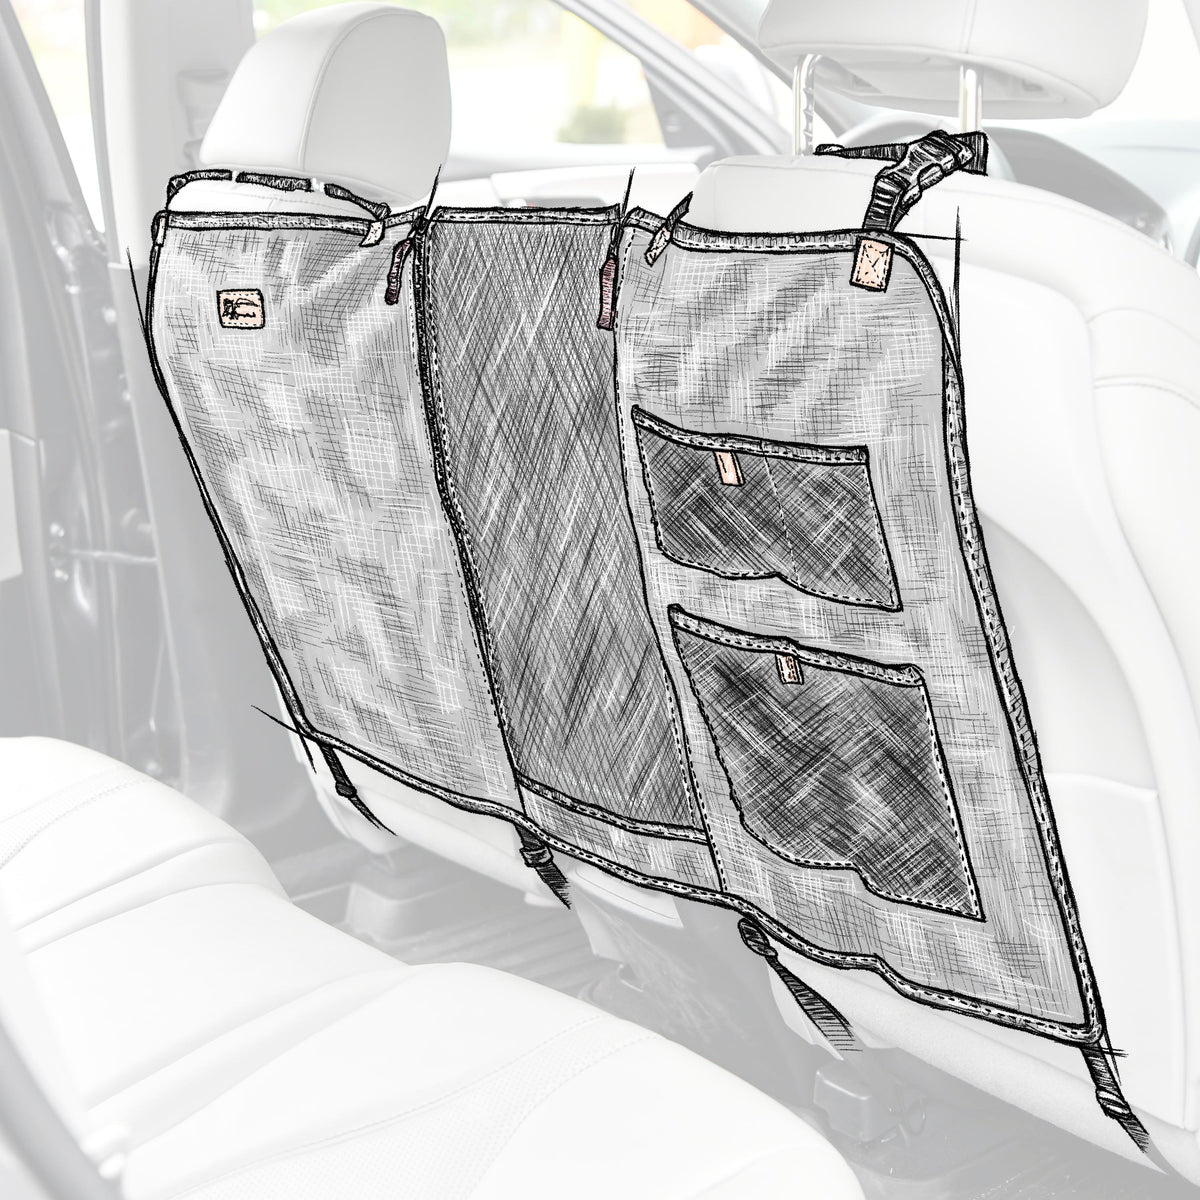 Urban Transit Pet Barrier | how to keep your dog in the backseat while driving | how to keep your car clean | car pet essentials | vertical storage